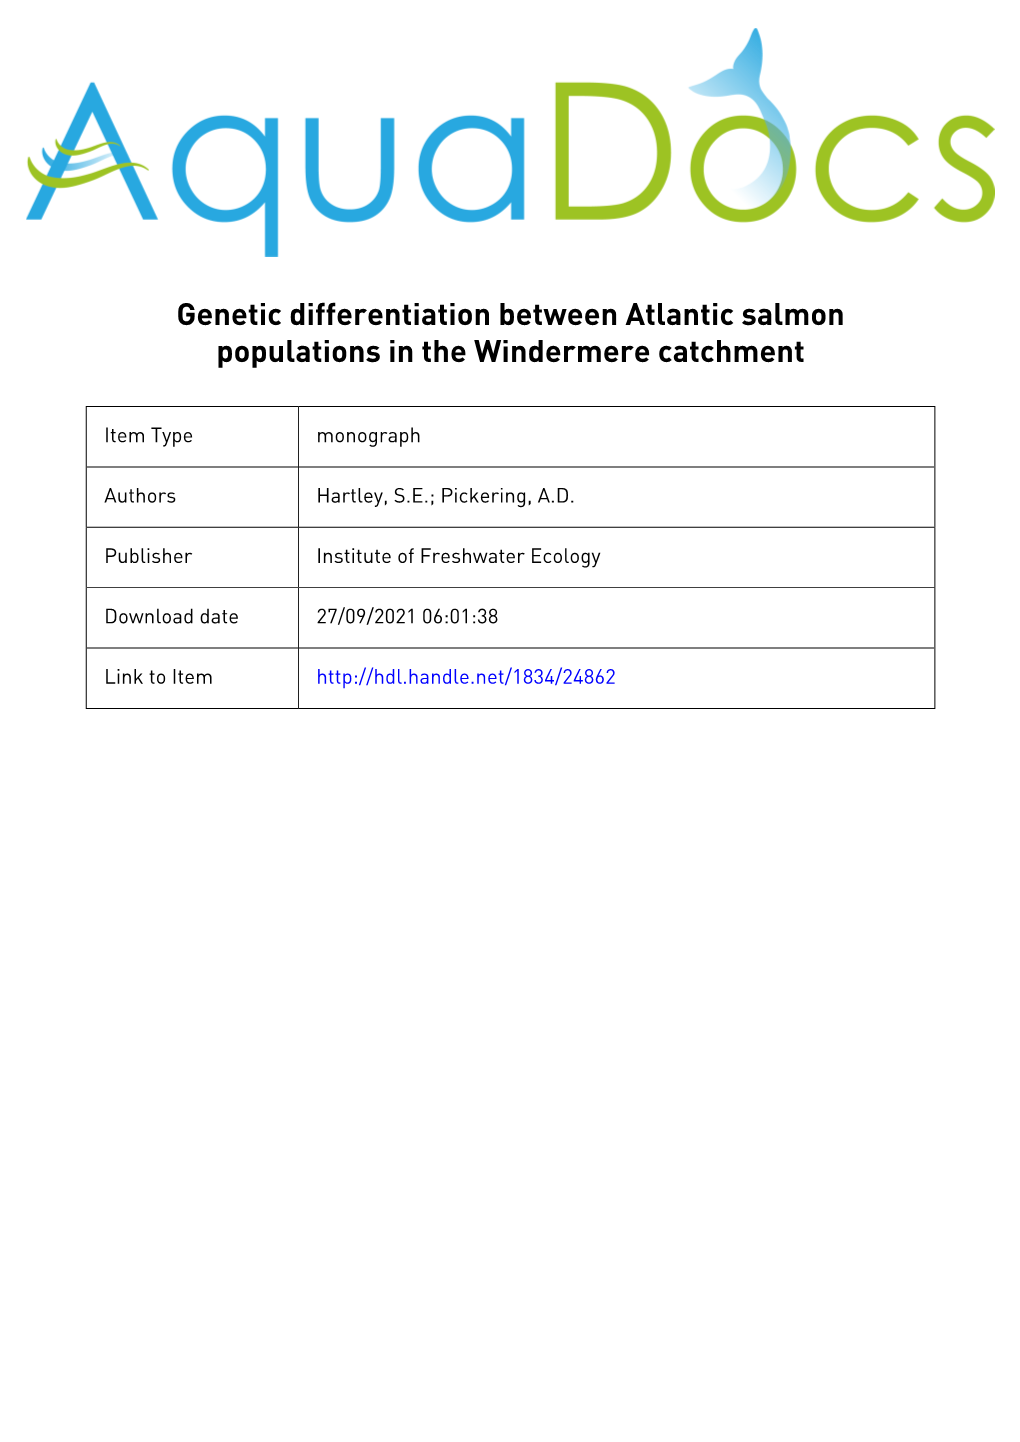 Genetic Differentiation Between Atlantic Salmon Populations in the Windermere Catchment